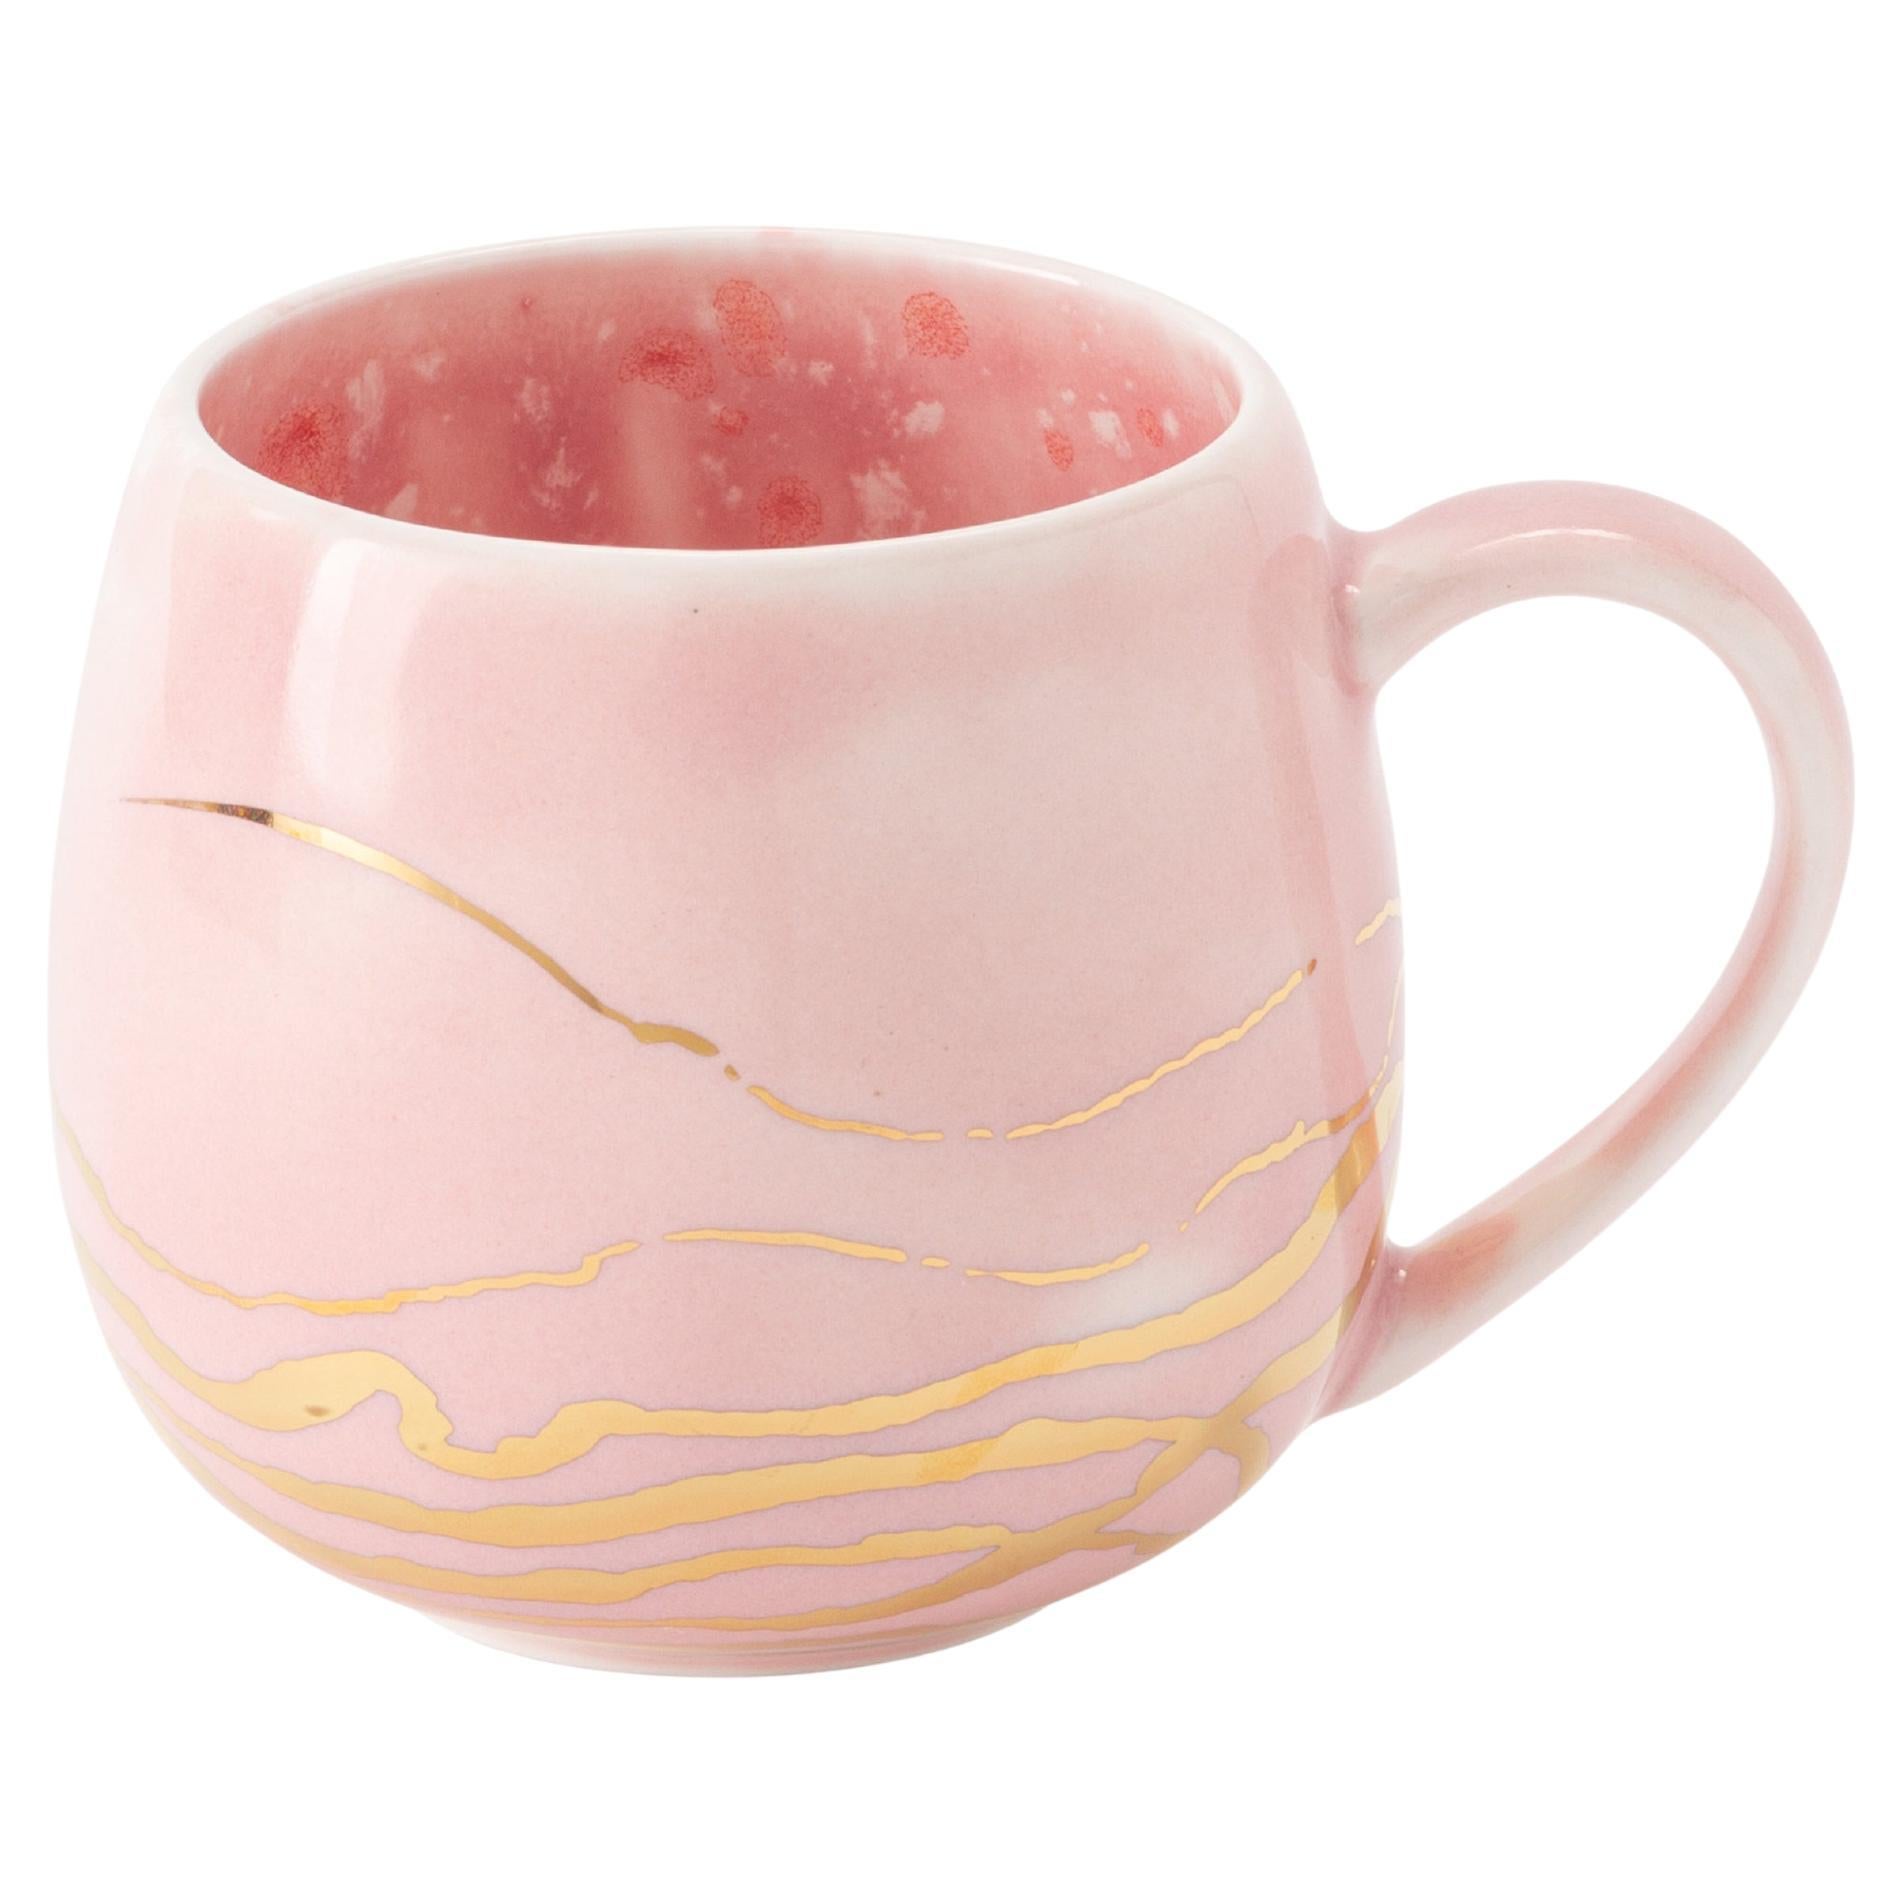 Contemporary Set of 2 Chubby Mugs Hand Painted Porcelain Berry Pink Gold For Sale